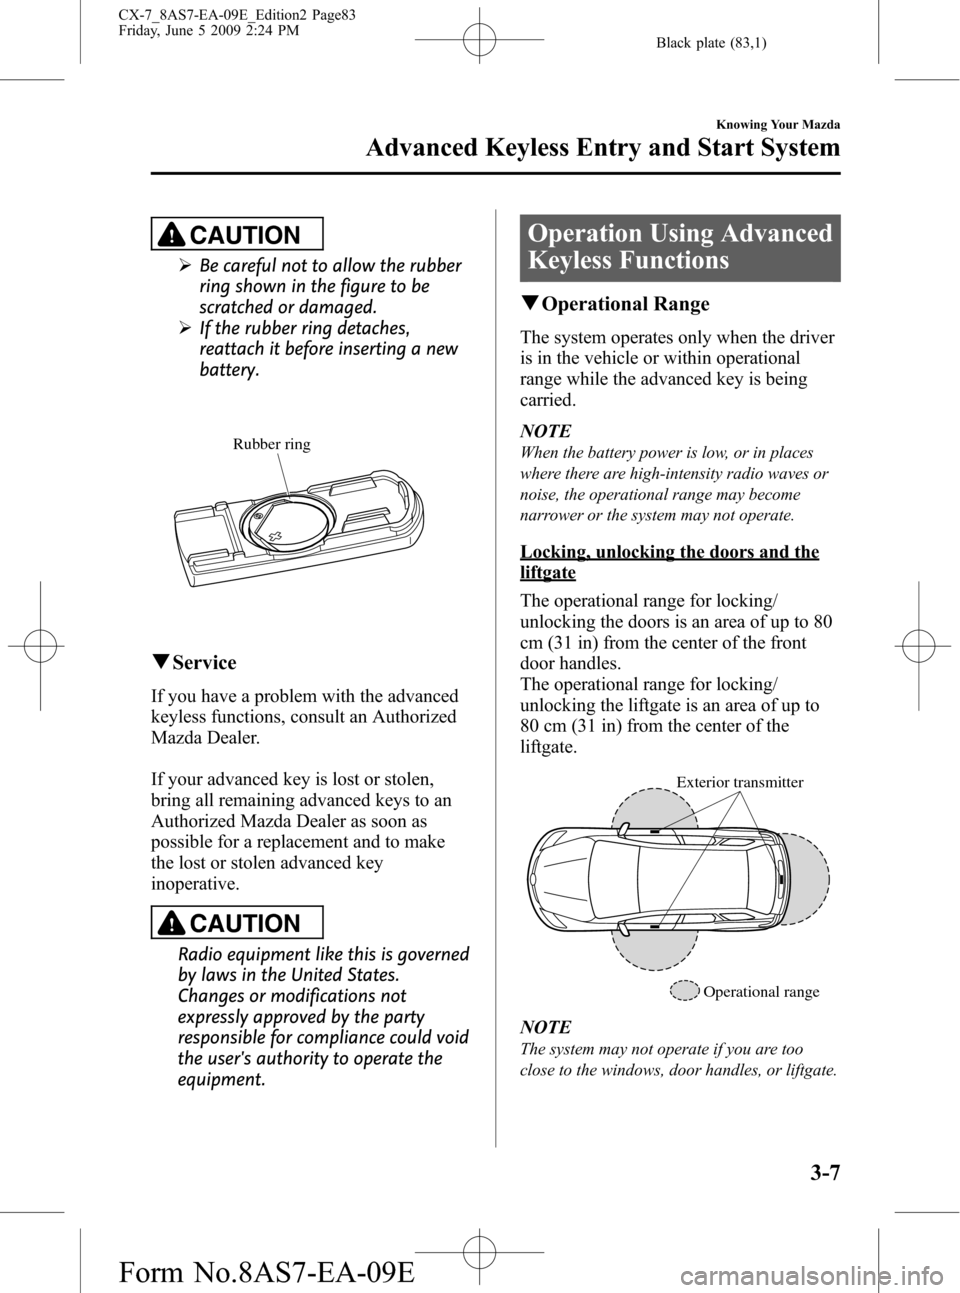 MAZDA MODEL CX-7 2010  Owners Manual (in English) Black plate (83,1)
CAUTION
ØBe careful not to allow the rubber
ring shown in the figure to be
scratched or damaged.
ØIf the rubber ring detaches,
reattach it before inserting a new
battery.
Rubber r